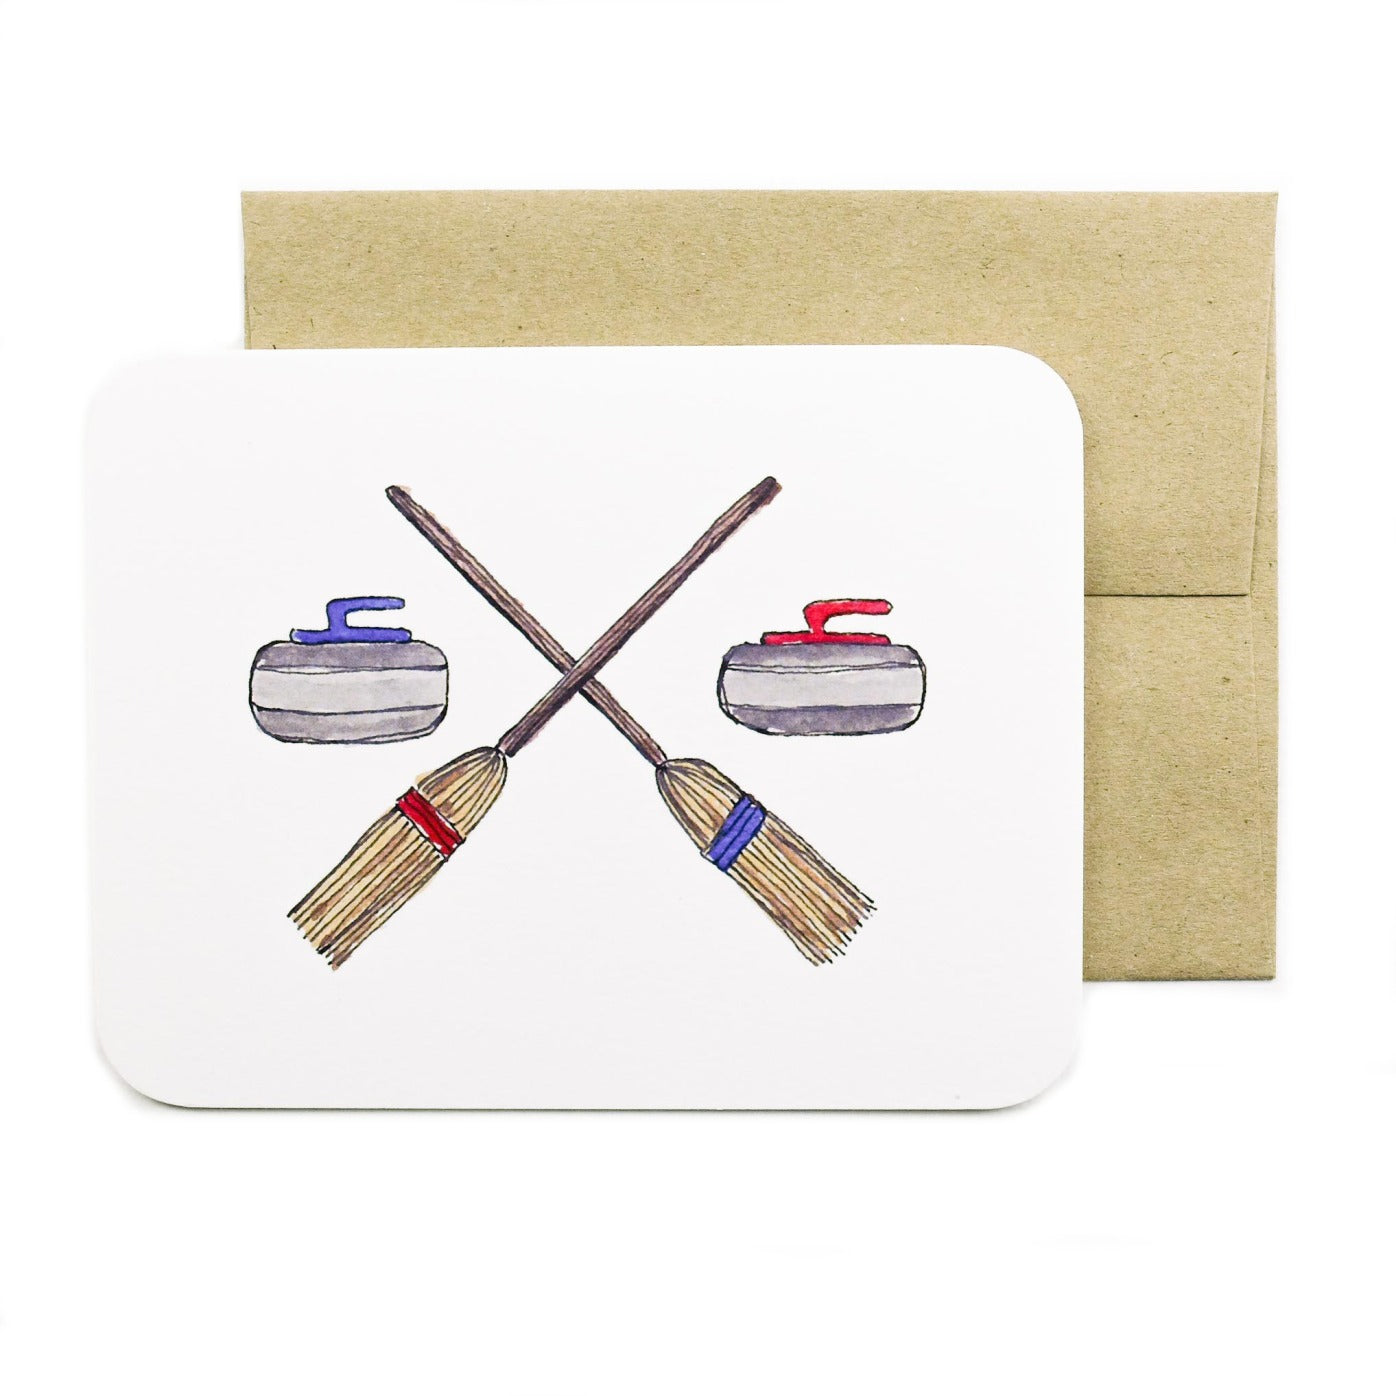 Made in Canada greeting card with drawing of two red and blue curling rocks and brooms.